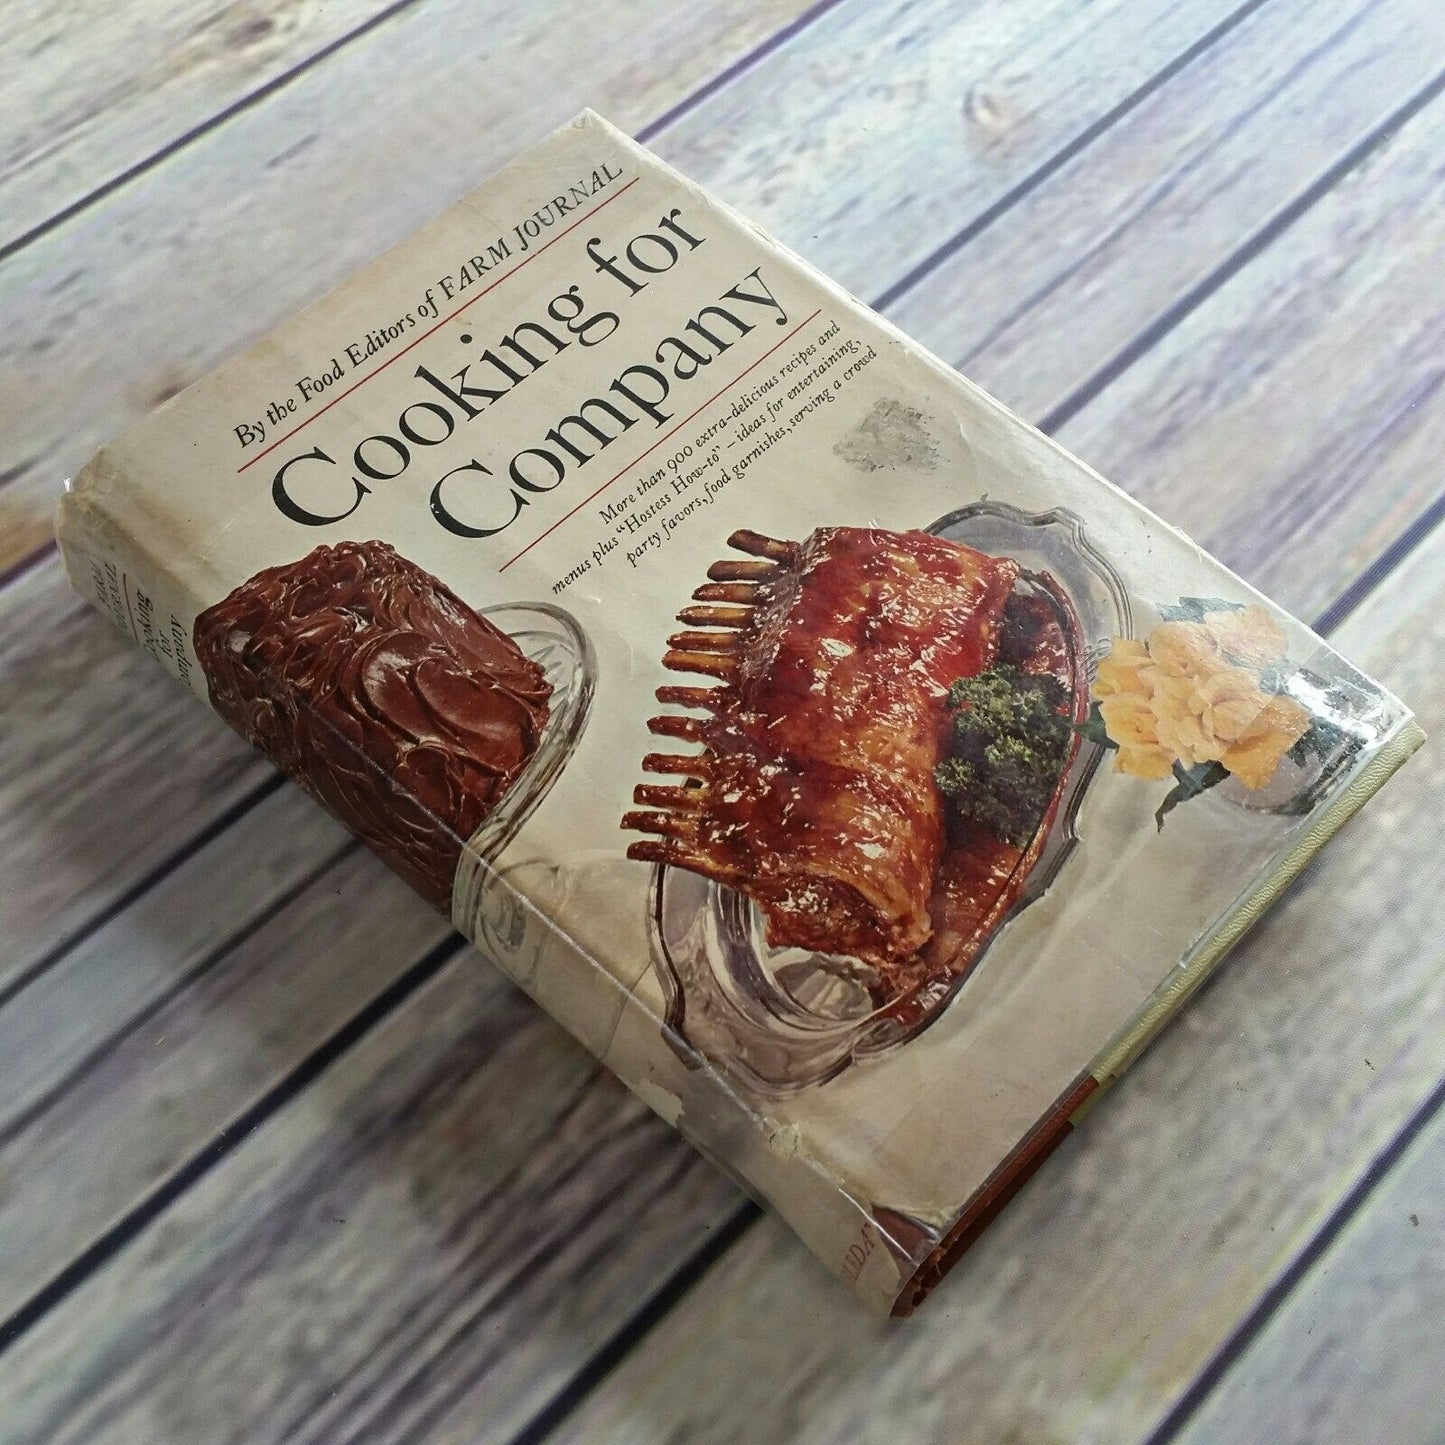 Vintage Farm Journal Cookbook Cooking for Company 1968 Hardcover with Dust Jacket First Edition 900 Recipes